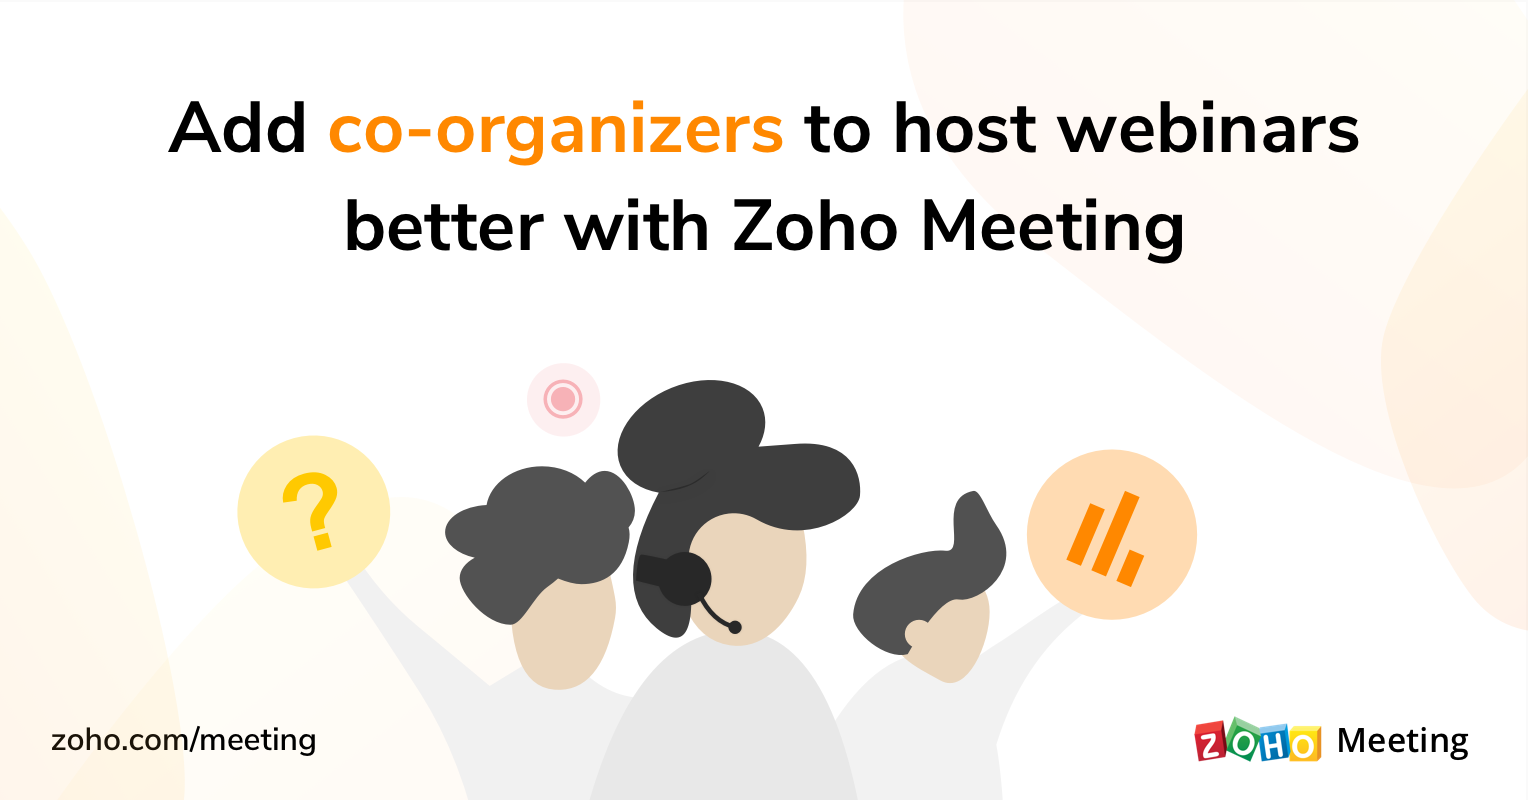 Introducing co-organizers for webinars in Zoho Meeting